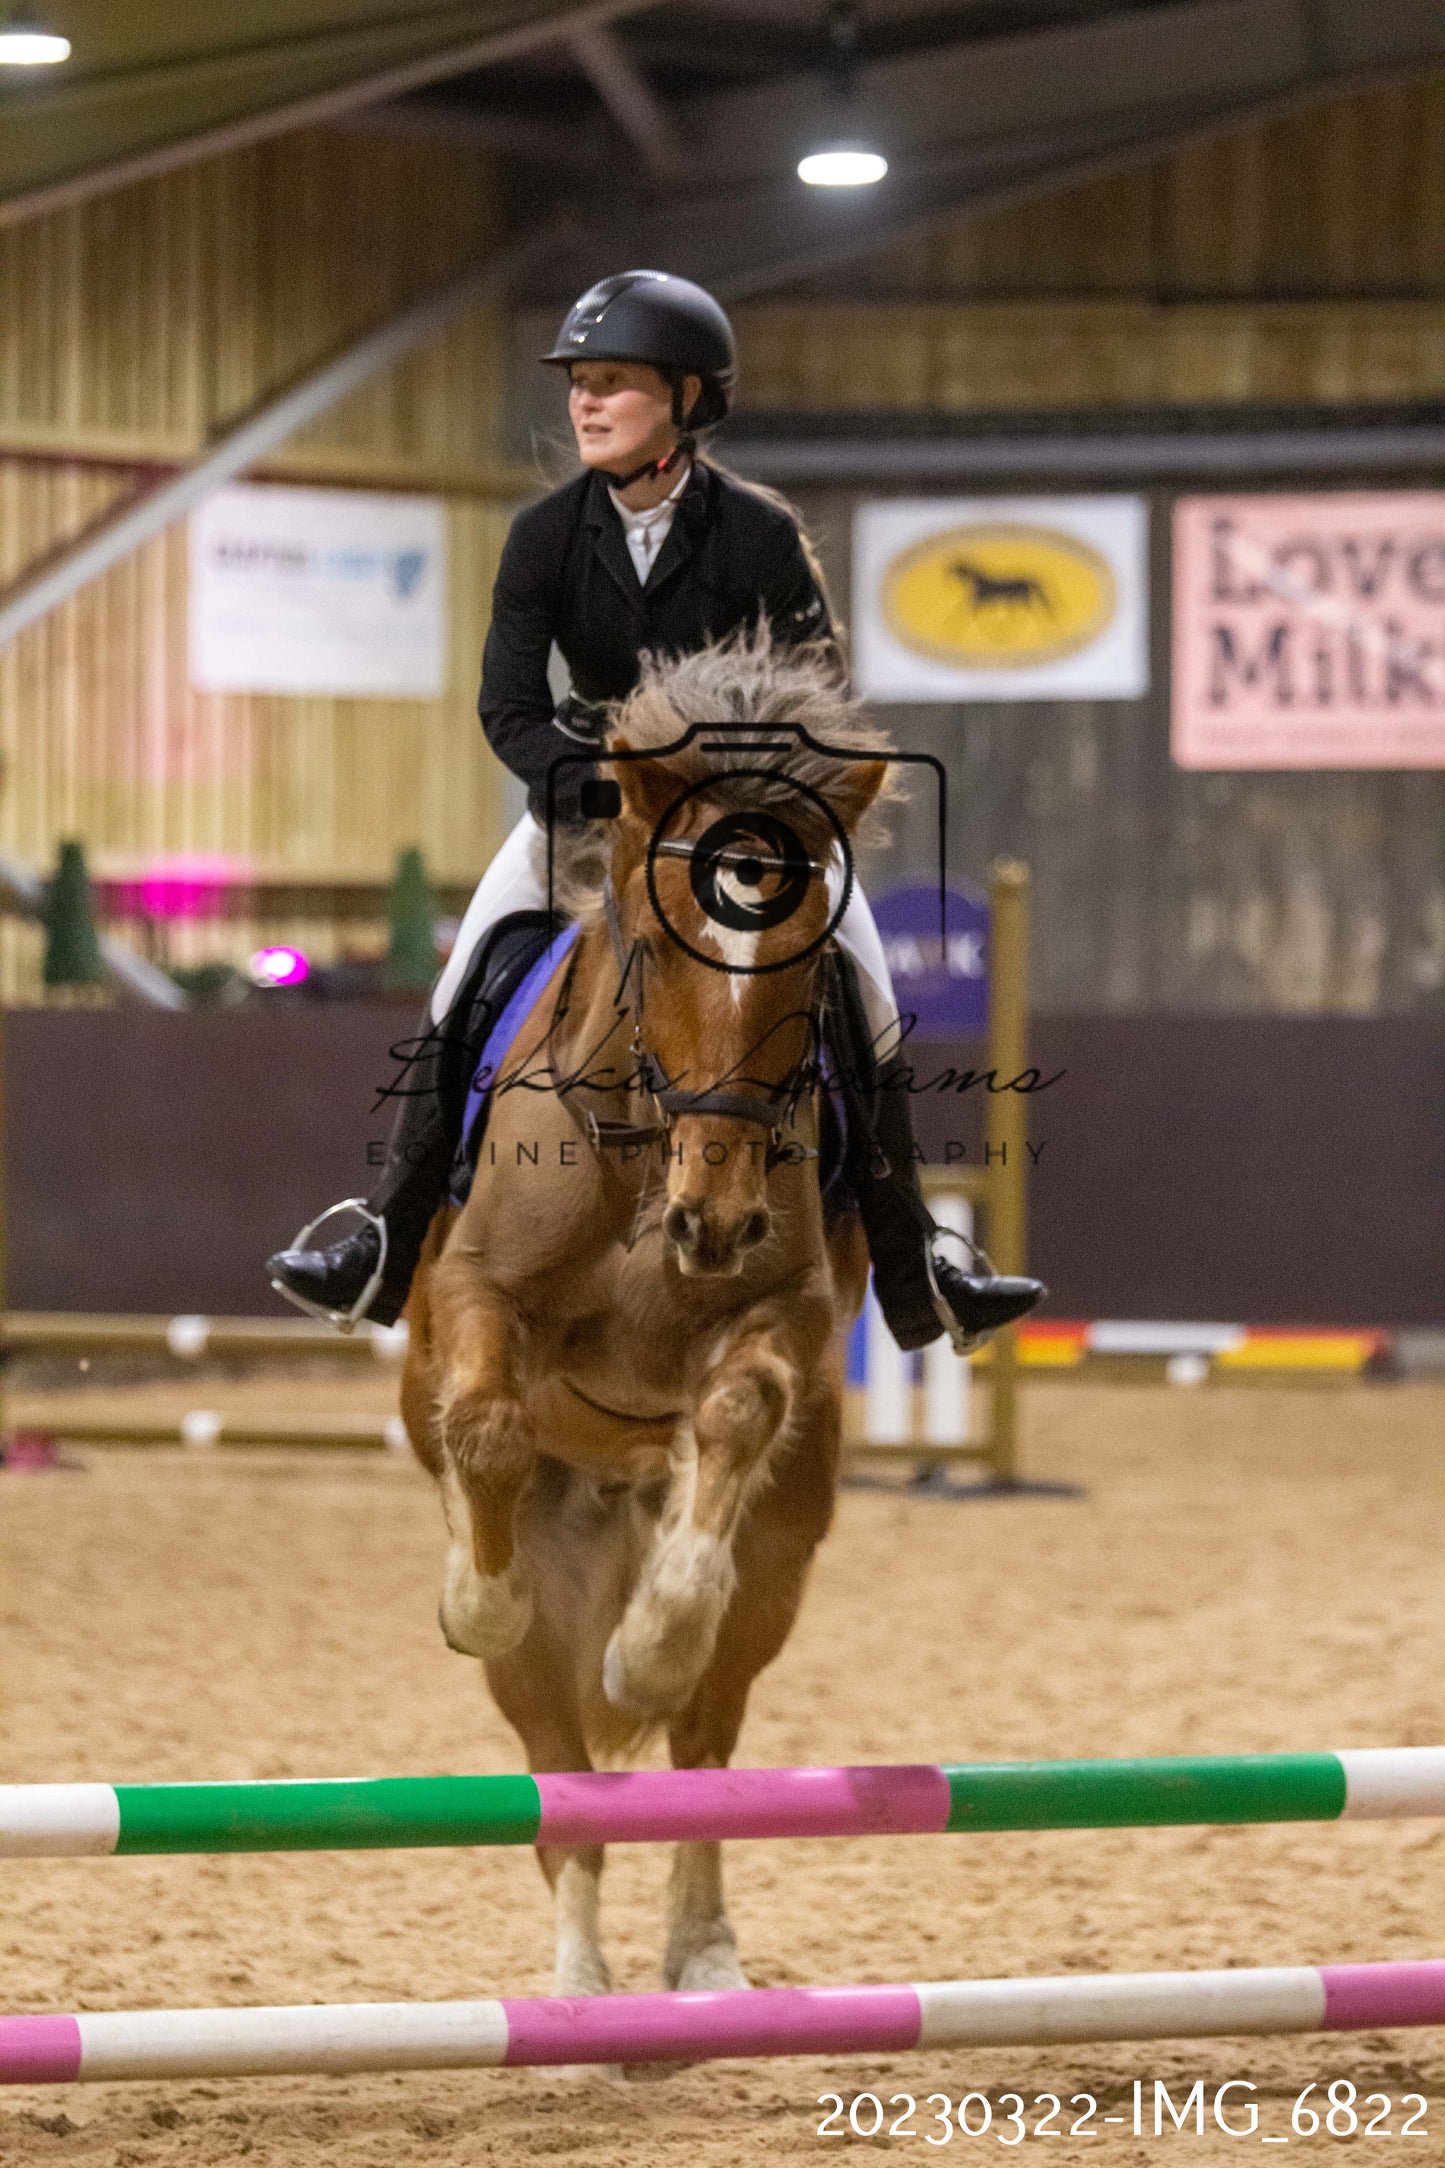 Home Farm Show Jumping 22nd March